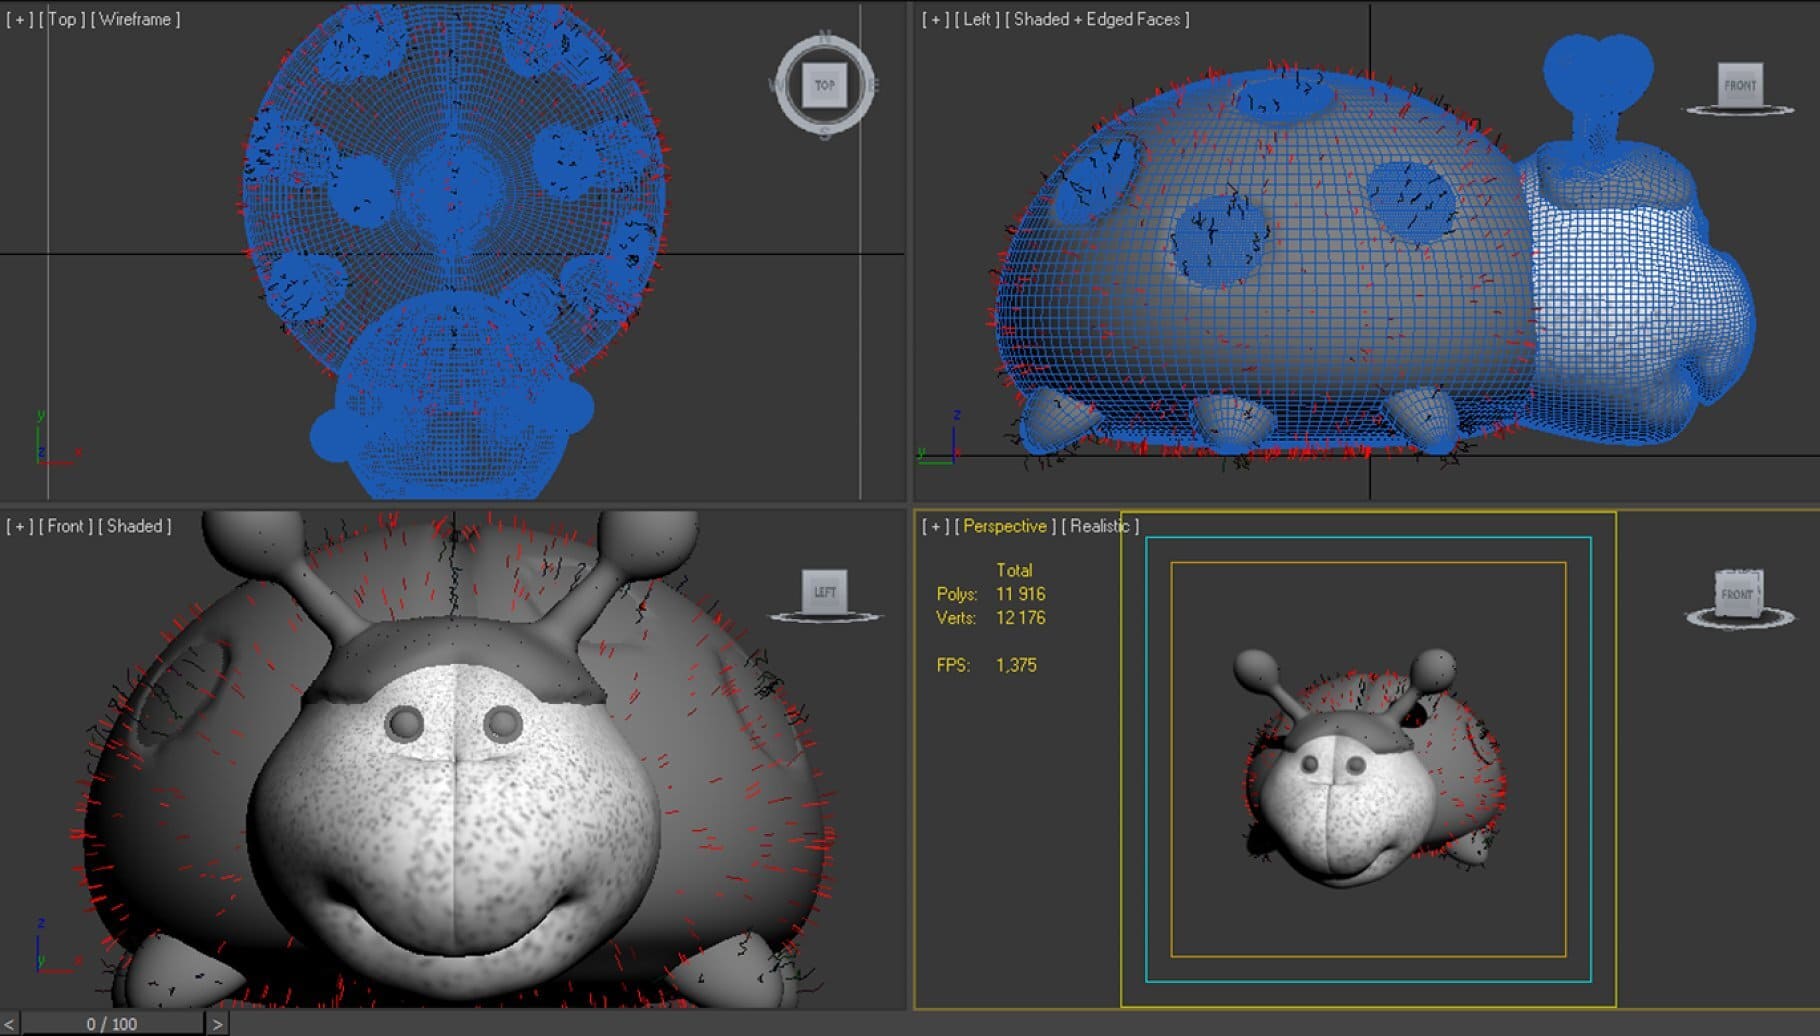 3D model of a ladybug in a computer program.